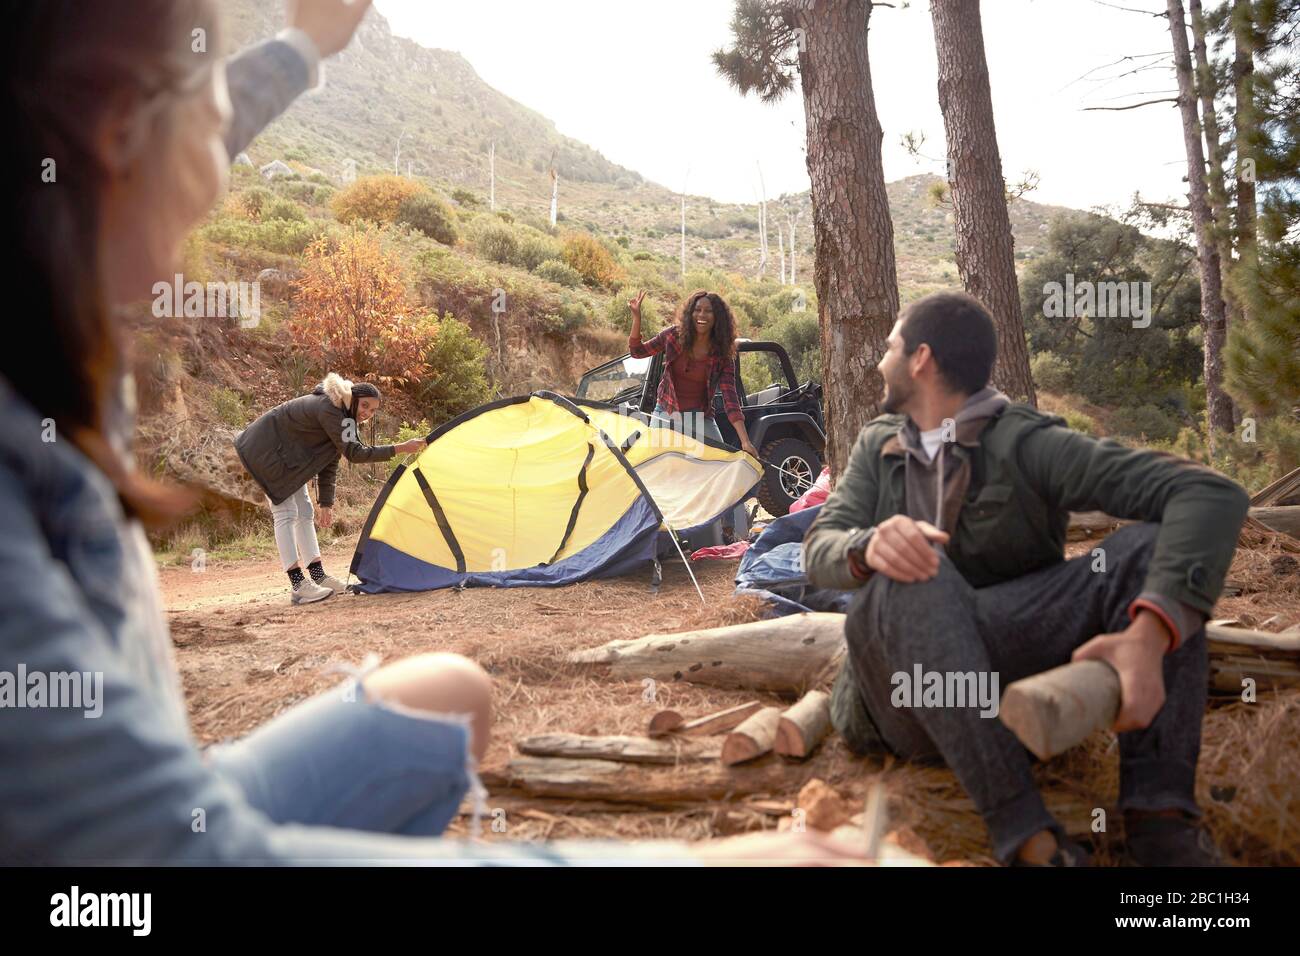 Young friends building campfire and pitching tent at campsite in woods Stock Photo